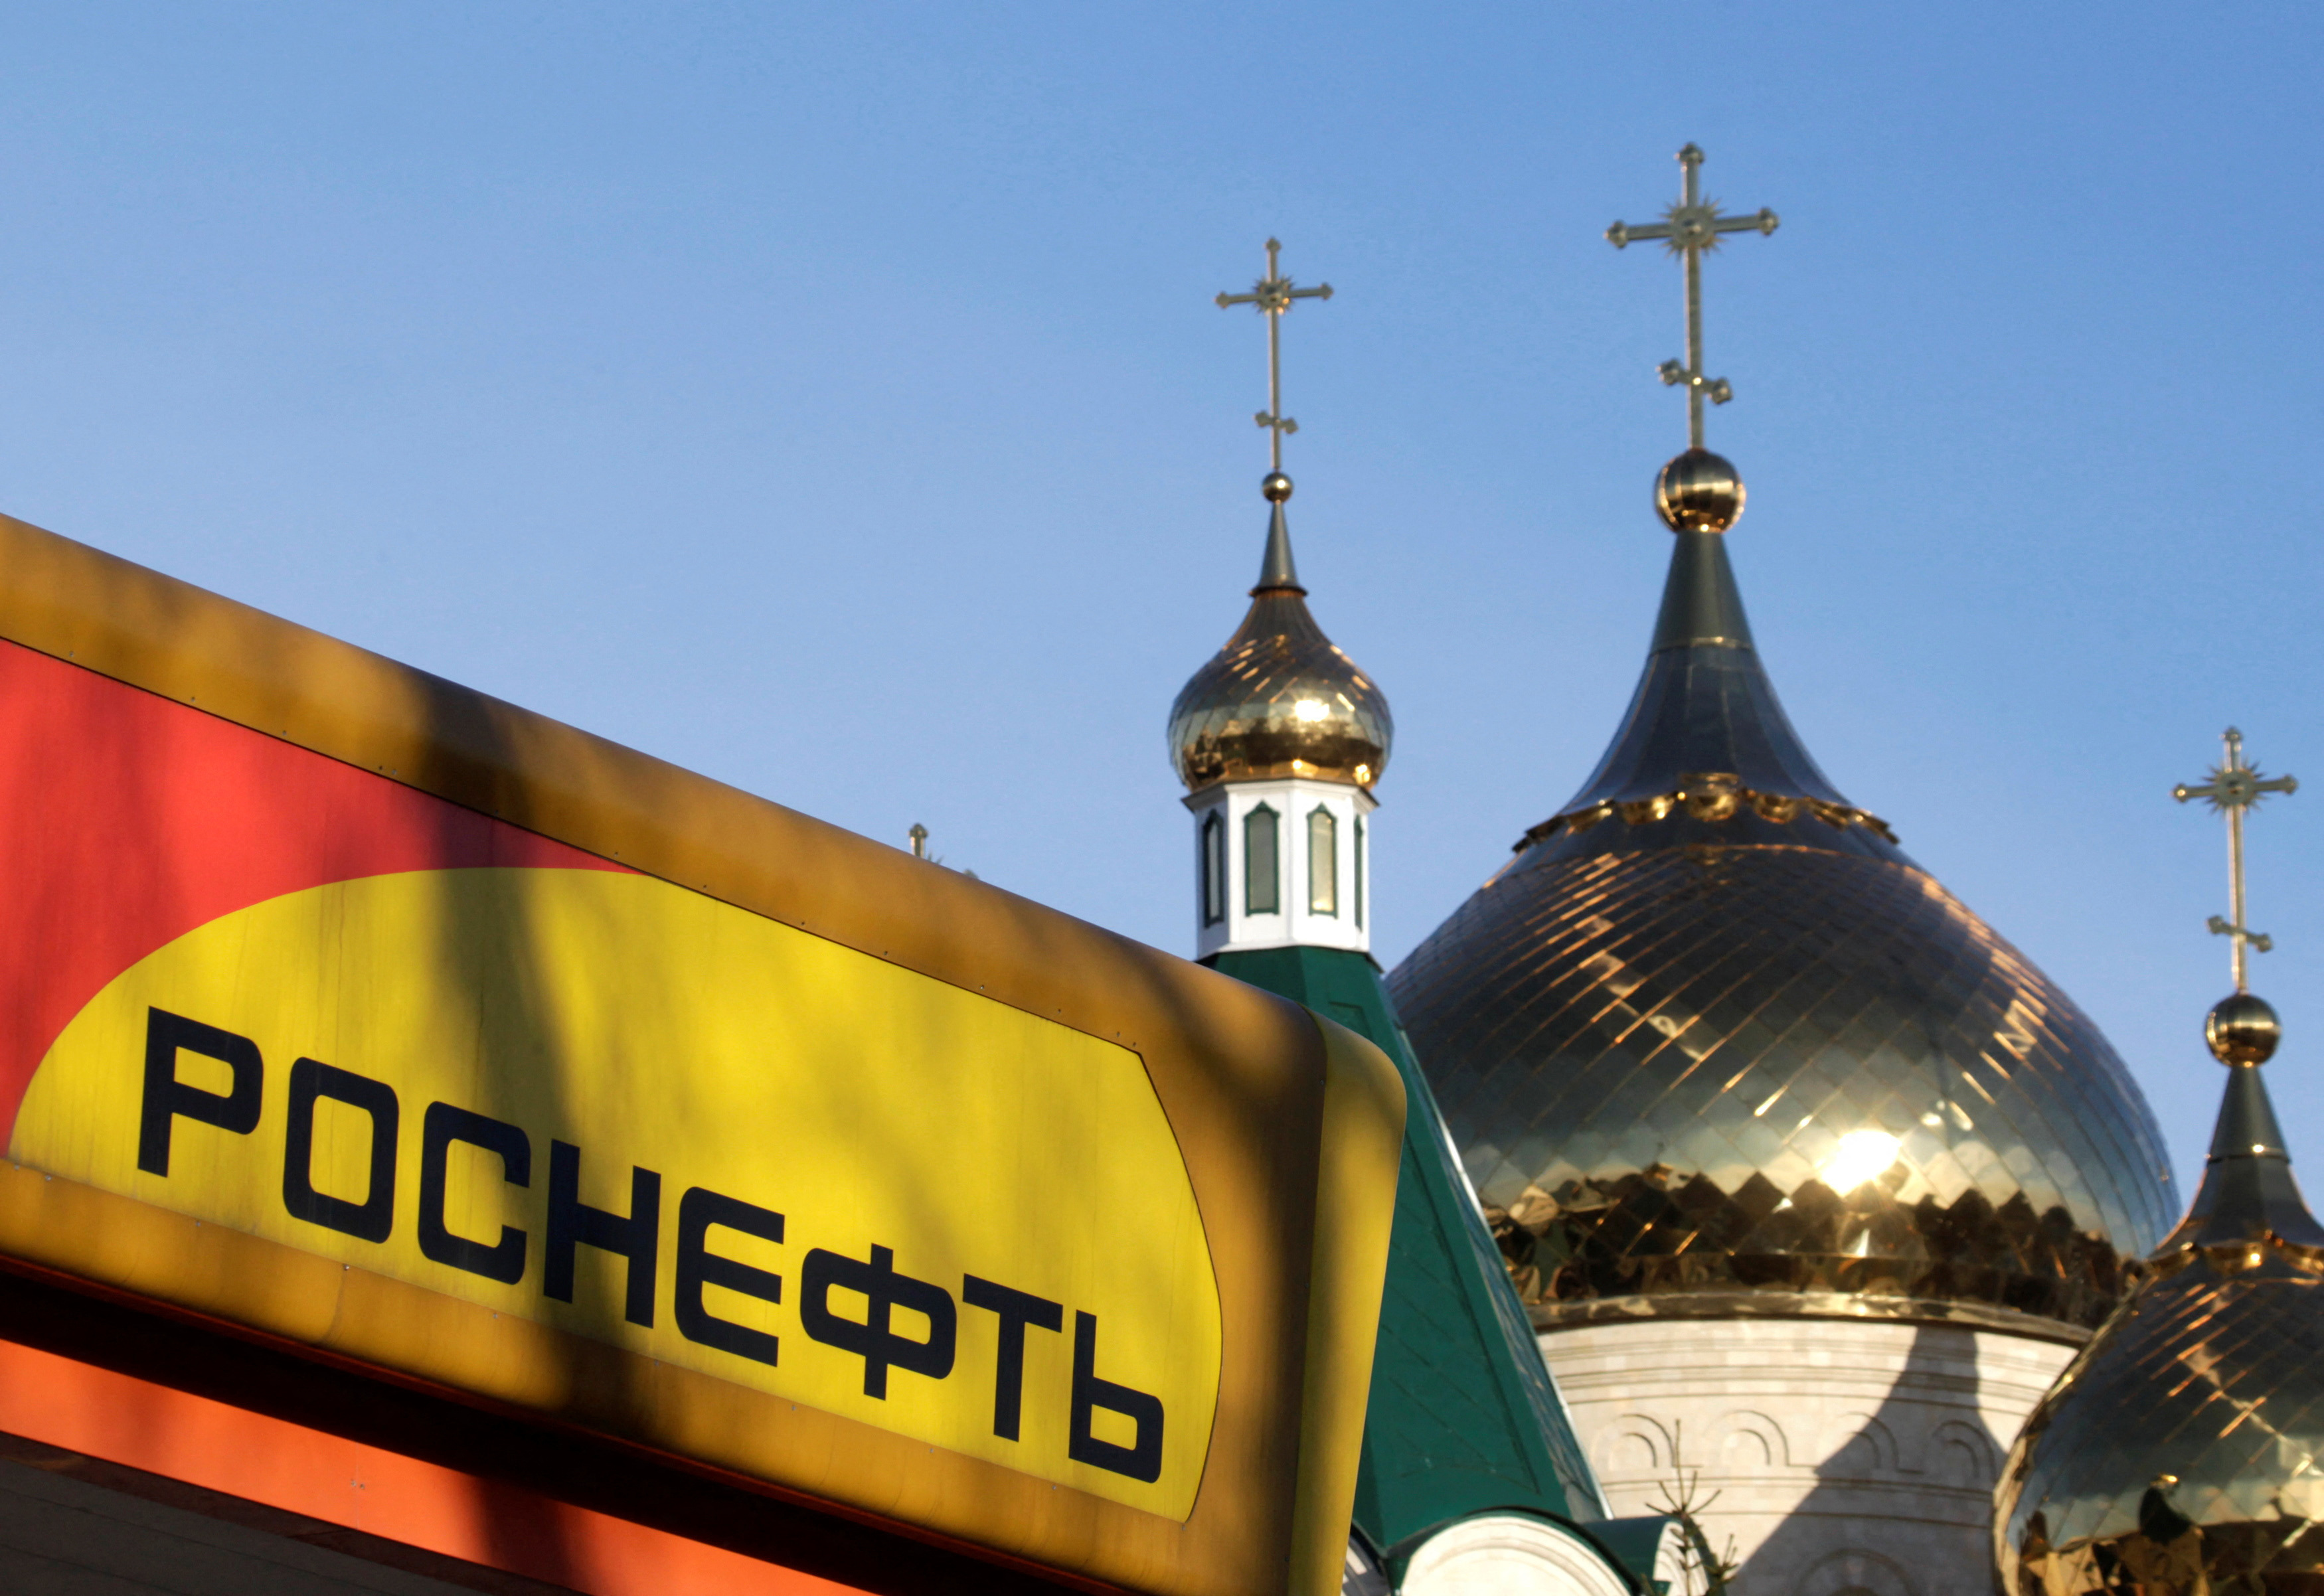 The logo of Russia's top crude producer Rosneft is seen on a gasoline station near a church in Stavropol